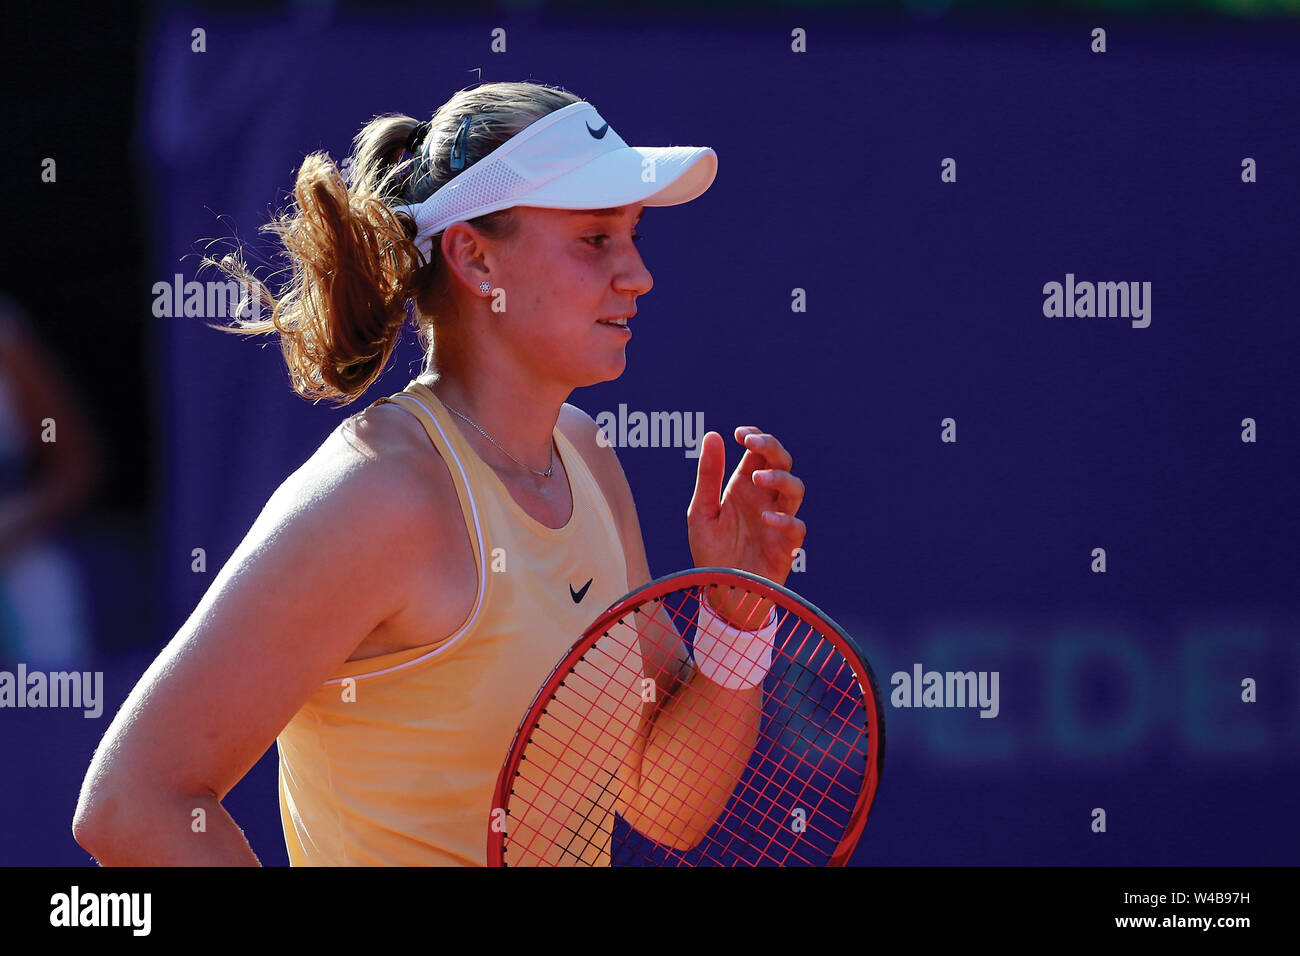 Wta Tennis High Resolution Stock Photography And Images Alamy